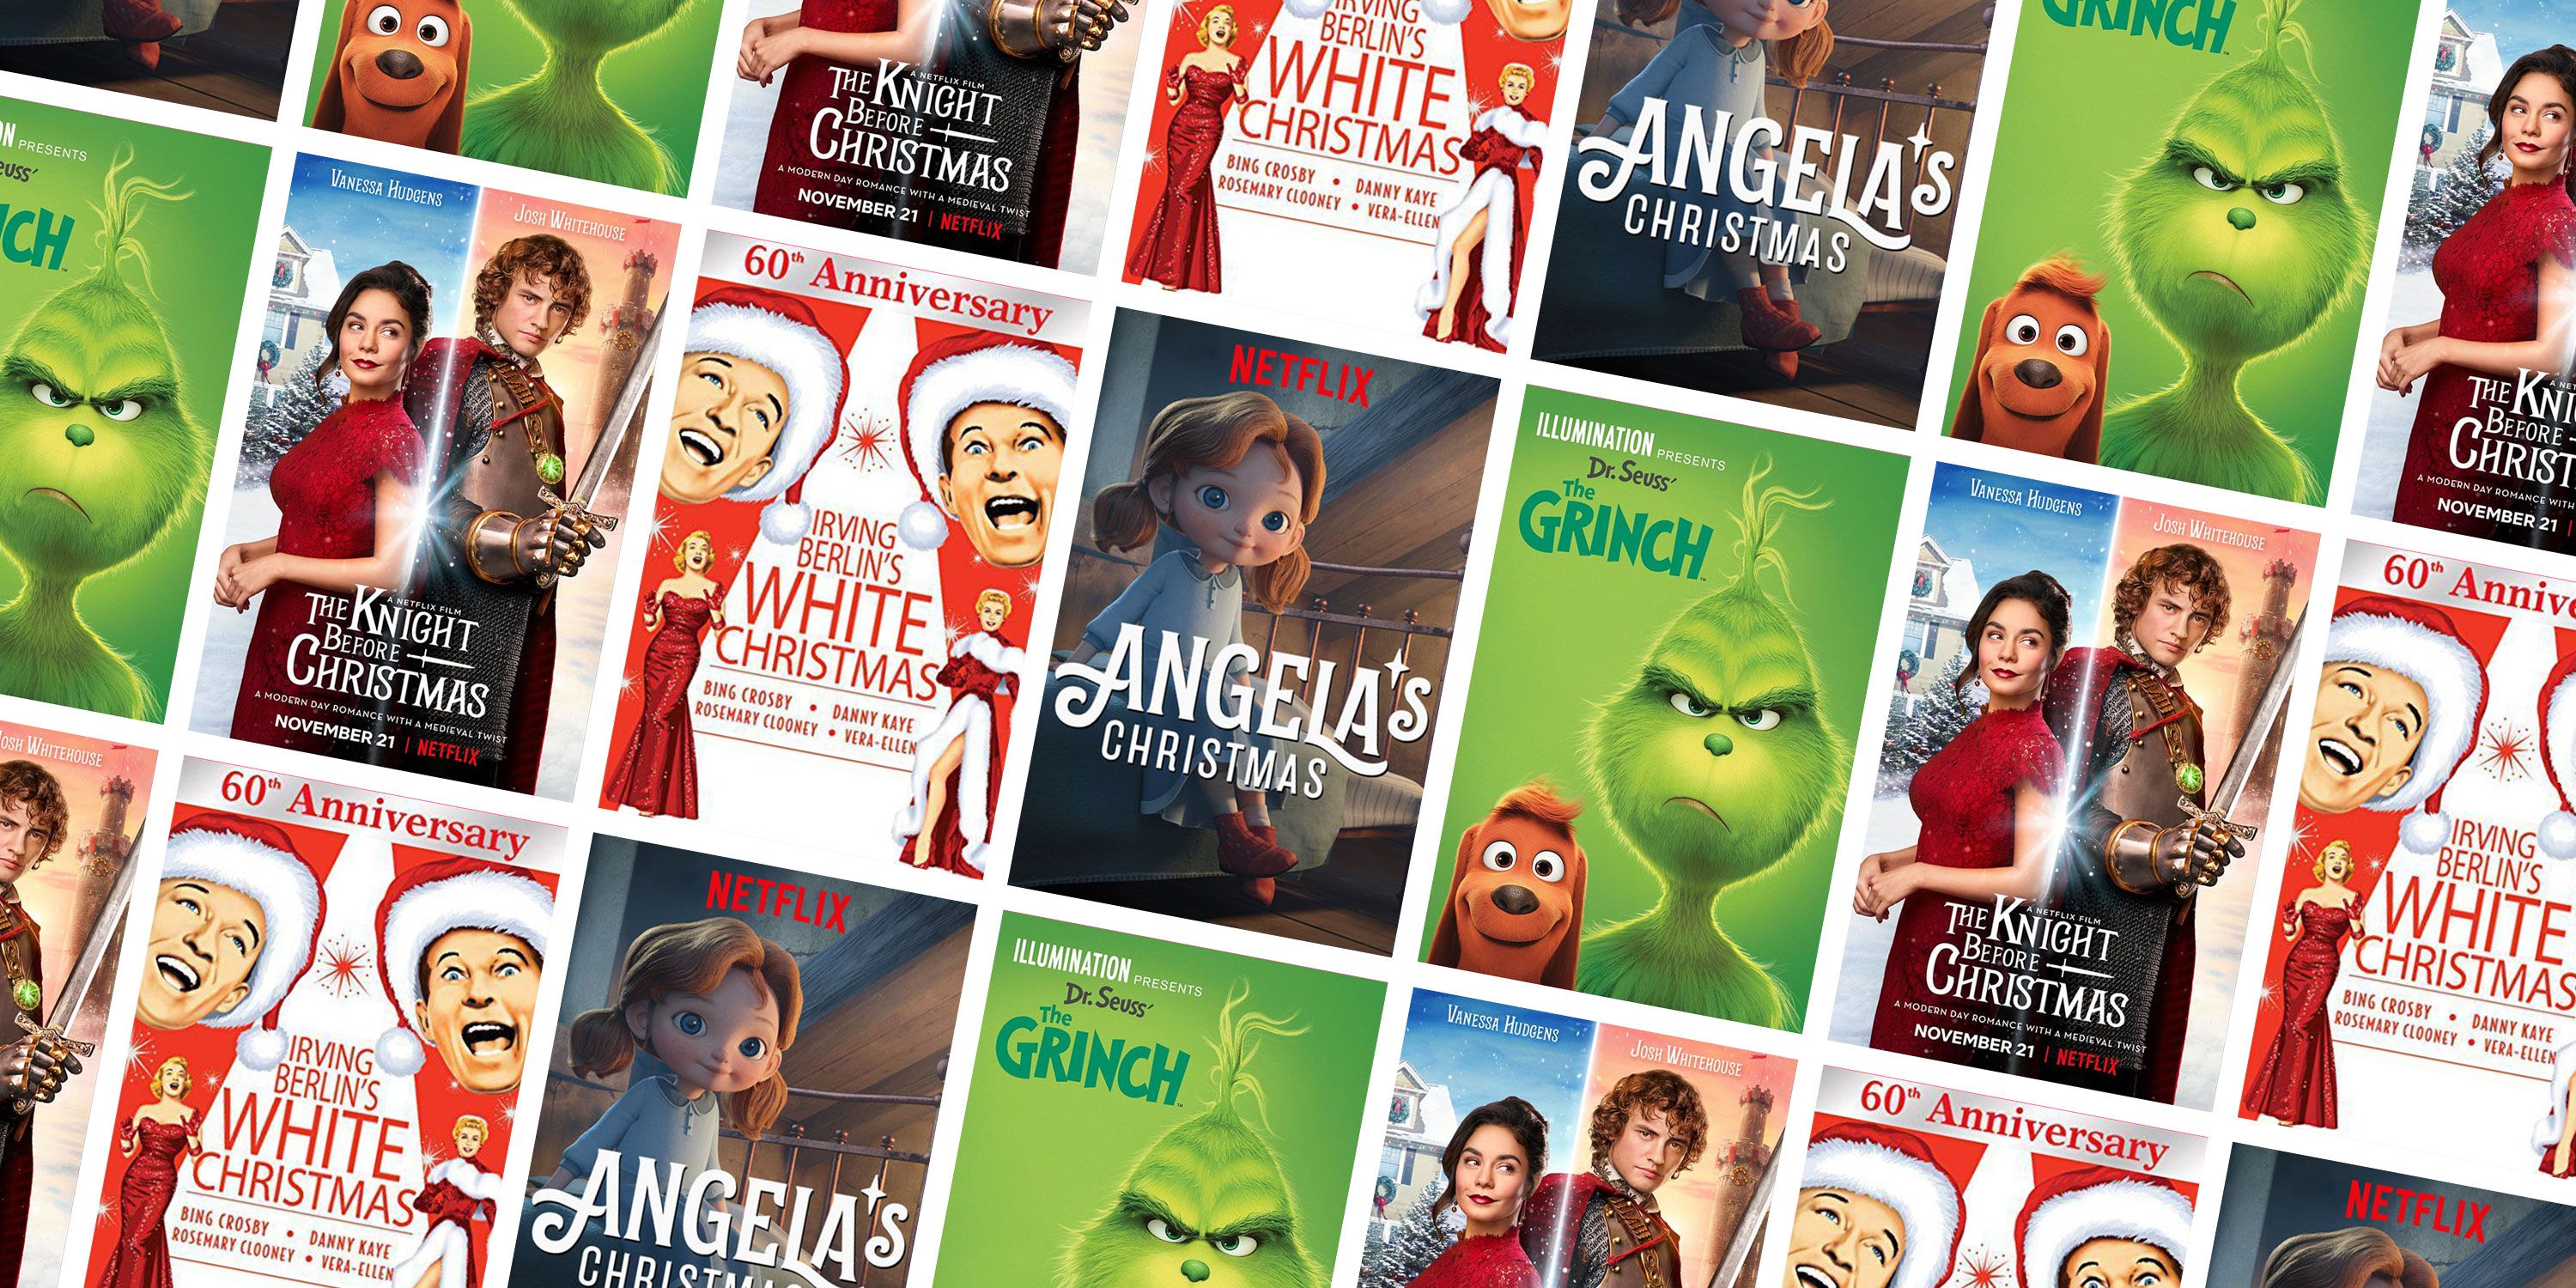 42 Best Christmas Movies On Netflix Best Holiday Movies To Stream On Netflix,Personalized Birthday Gift Ideas For Boyfriend